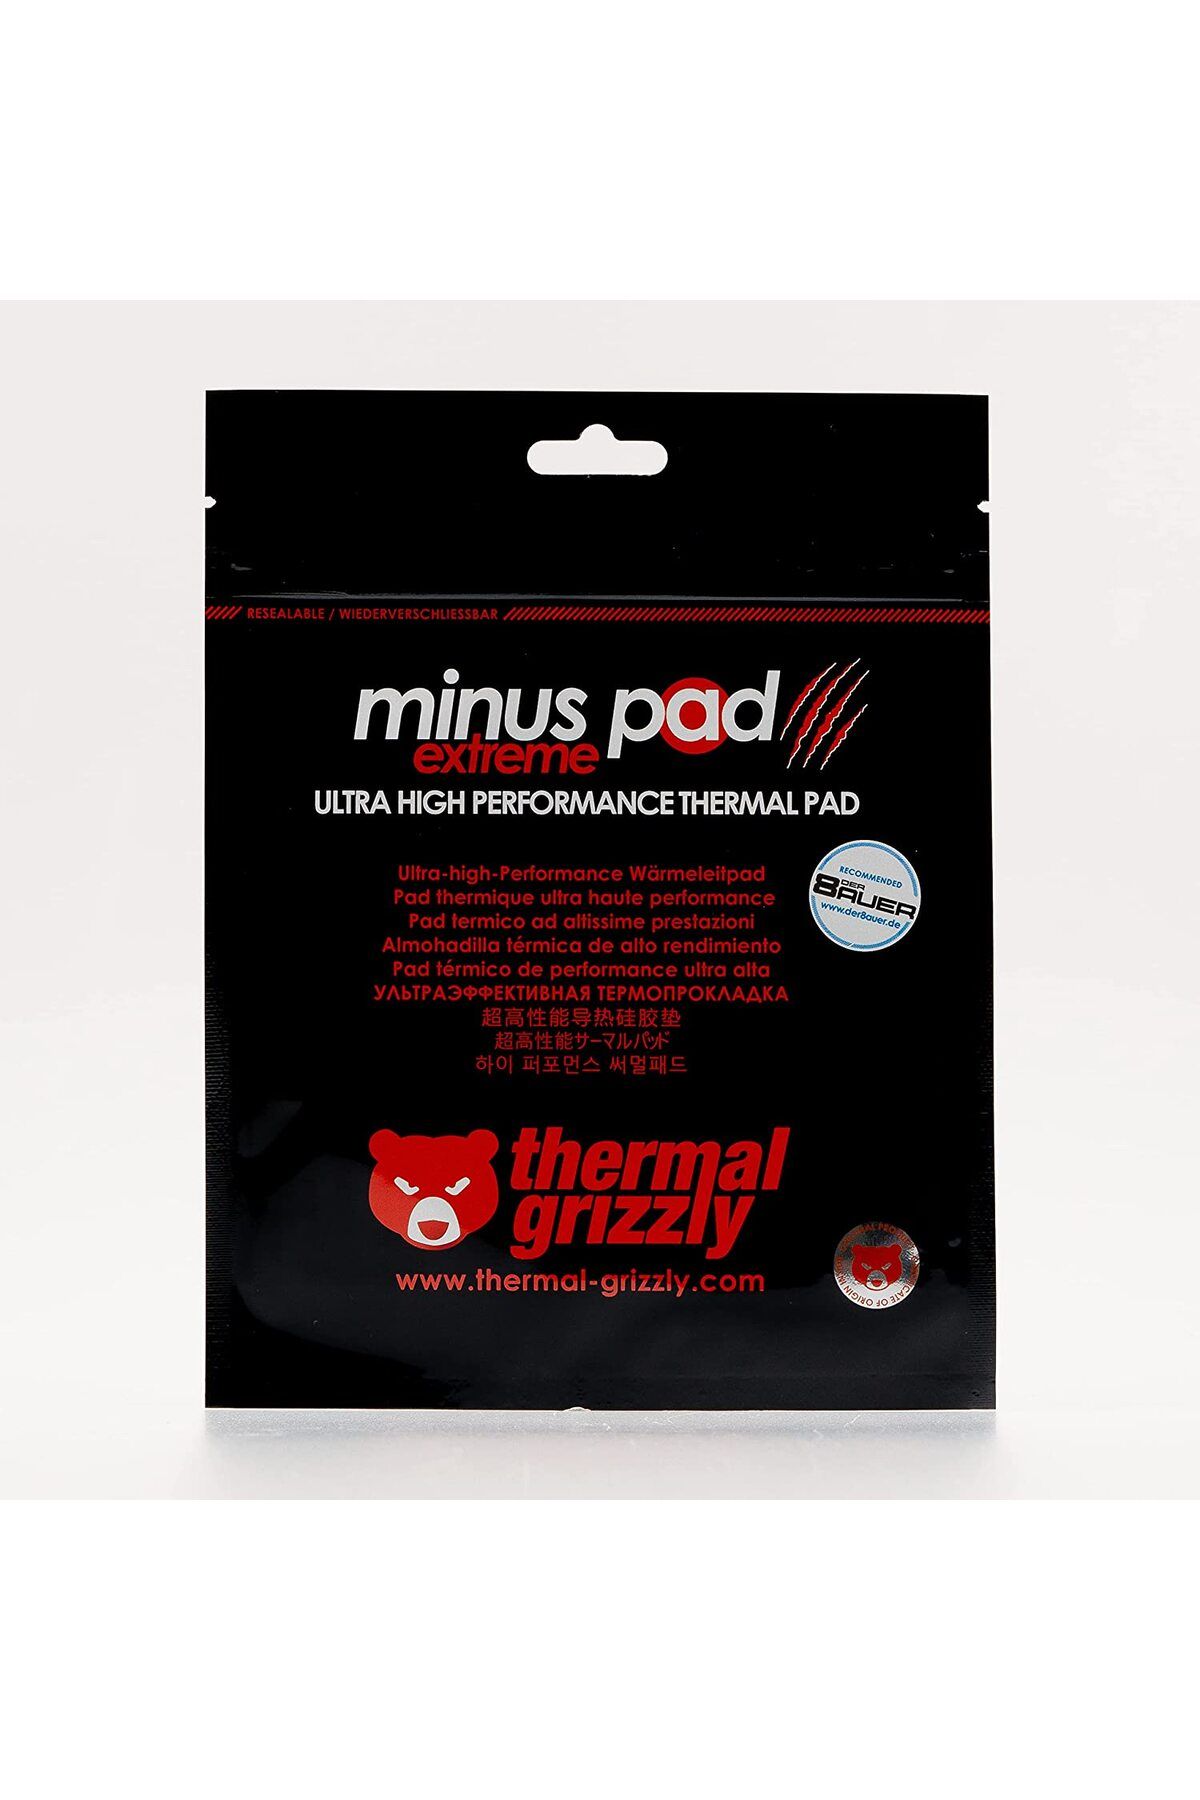 Universal Thermal Grizzly Minus Termal Pad Extreme 120X20X1.5MM